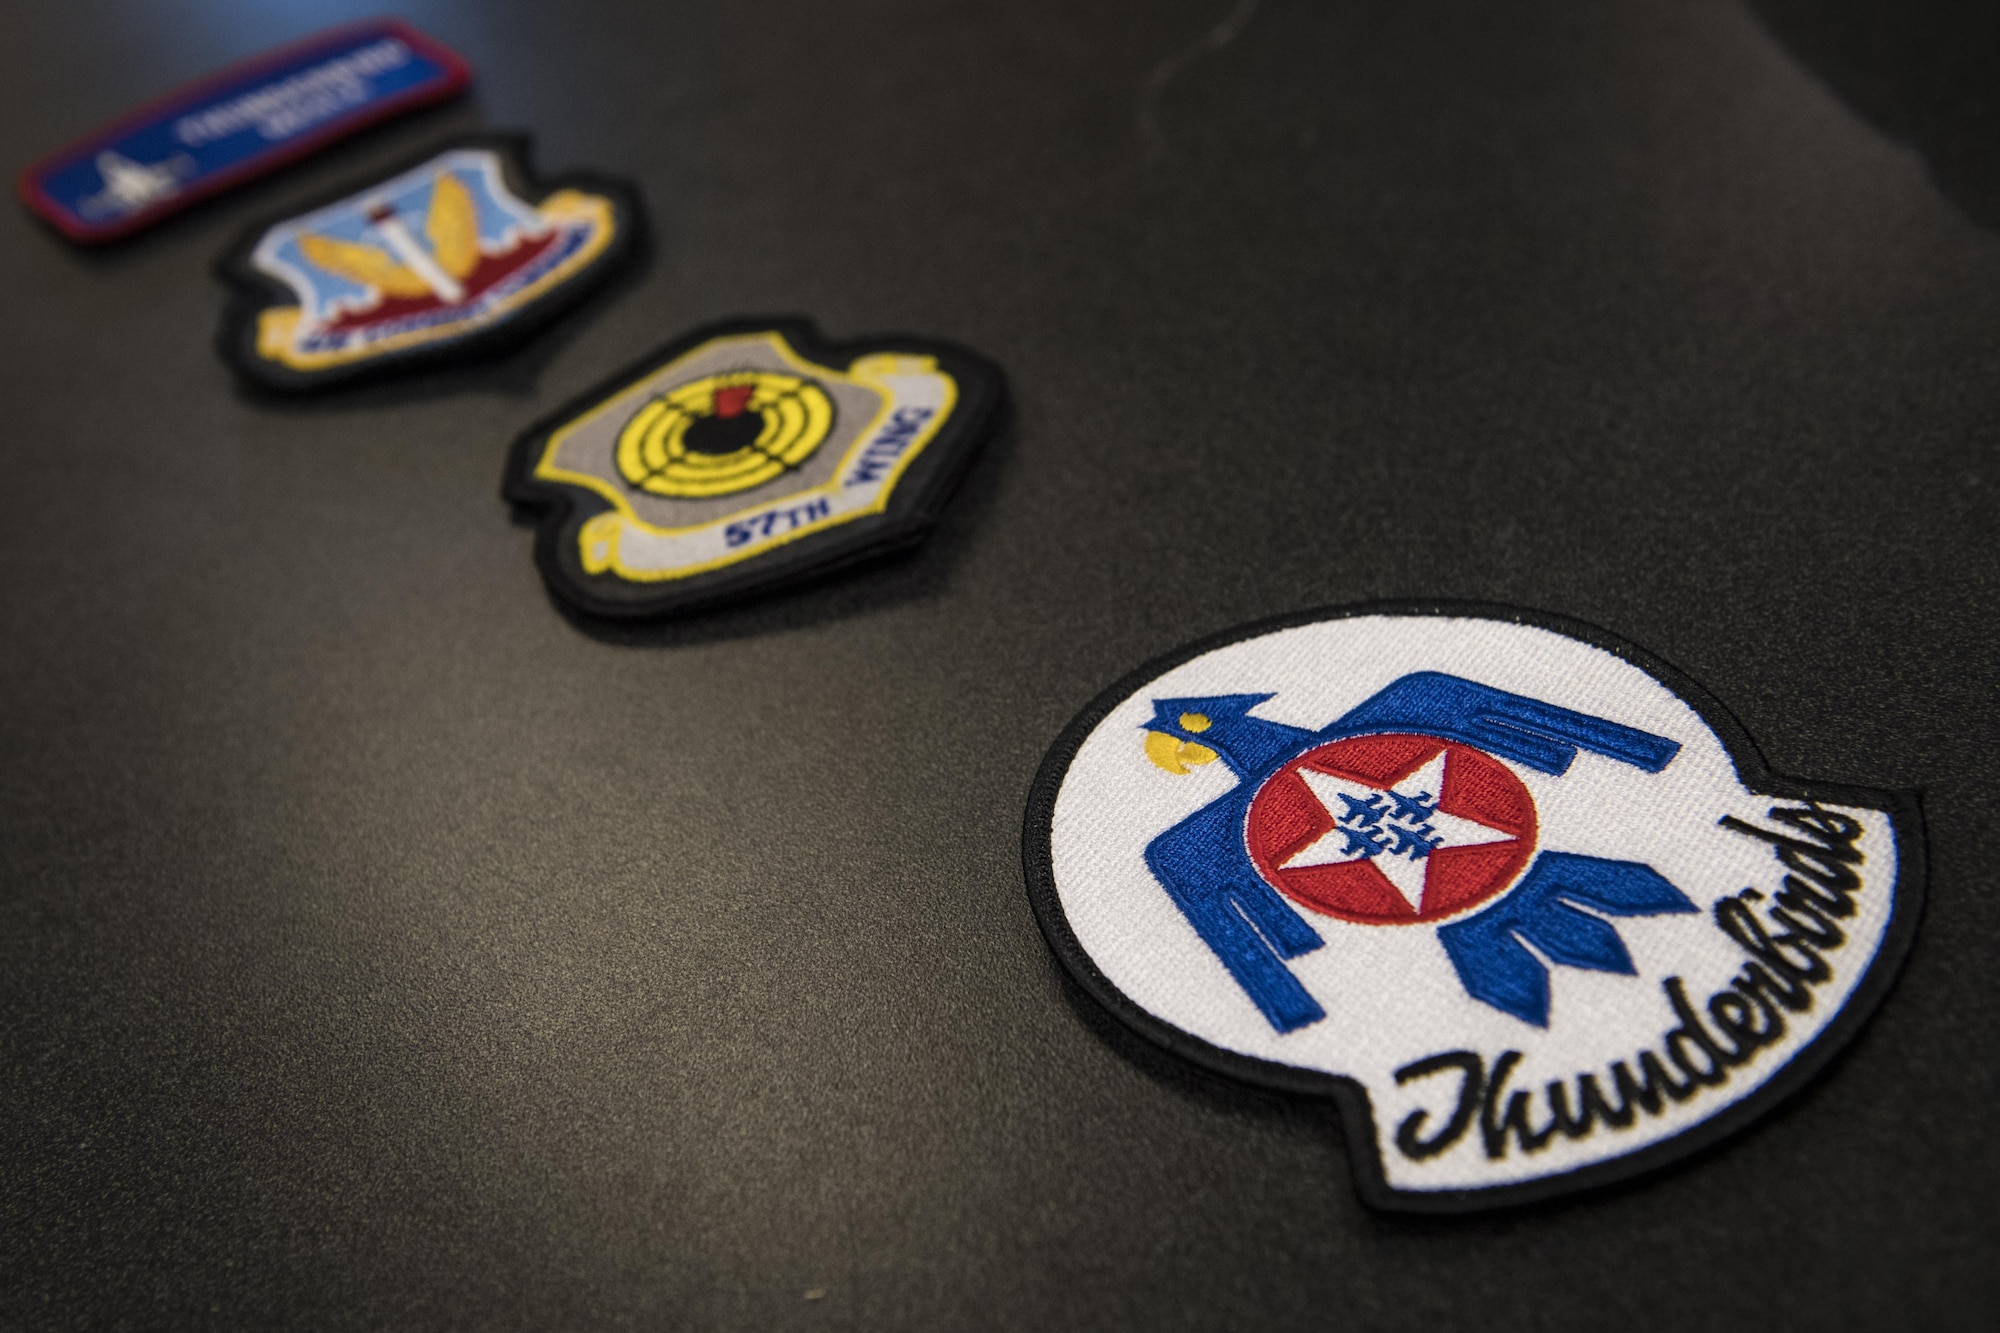 Patches rest on a table before being presented to Noelani Mathews, multimedia journalist, before her media flight in an F-16D Fighting Falcon, Oct. 27, 2017, at Moody Air Force Base, Ga. The U.S. Air Force Thunderbirds, based out of Nellis Air Force Base, Nev., are the Air Force’s premier aerial demonstration team, performing at air shows and special events worldwide. (U.S. Air Force photo by Senior Airman Janiqua P. Robinson)